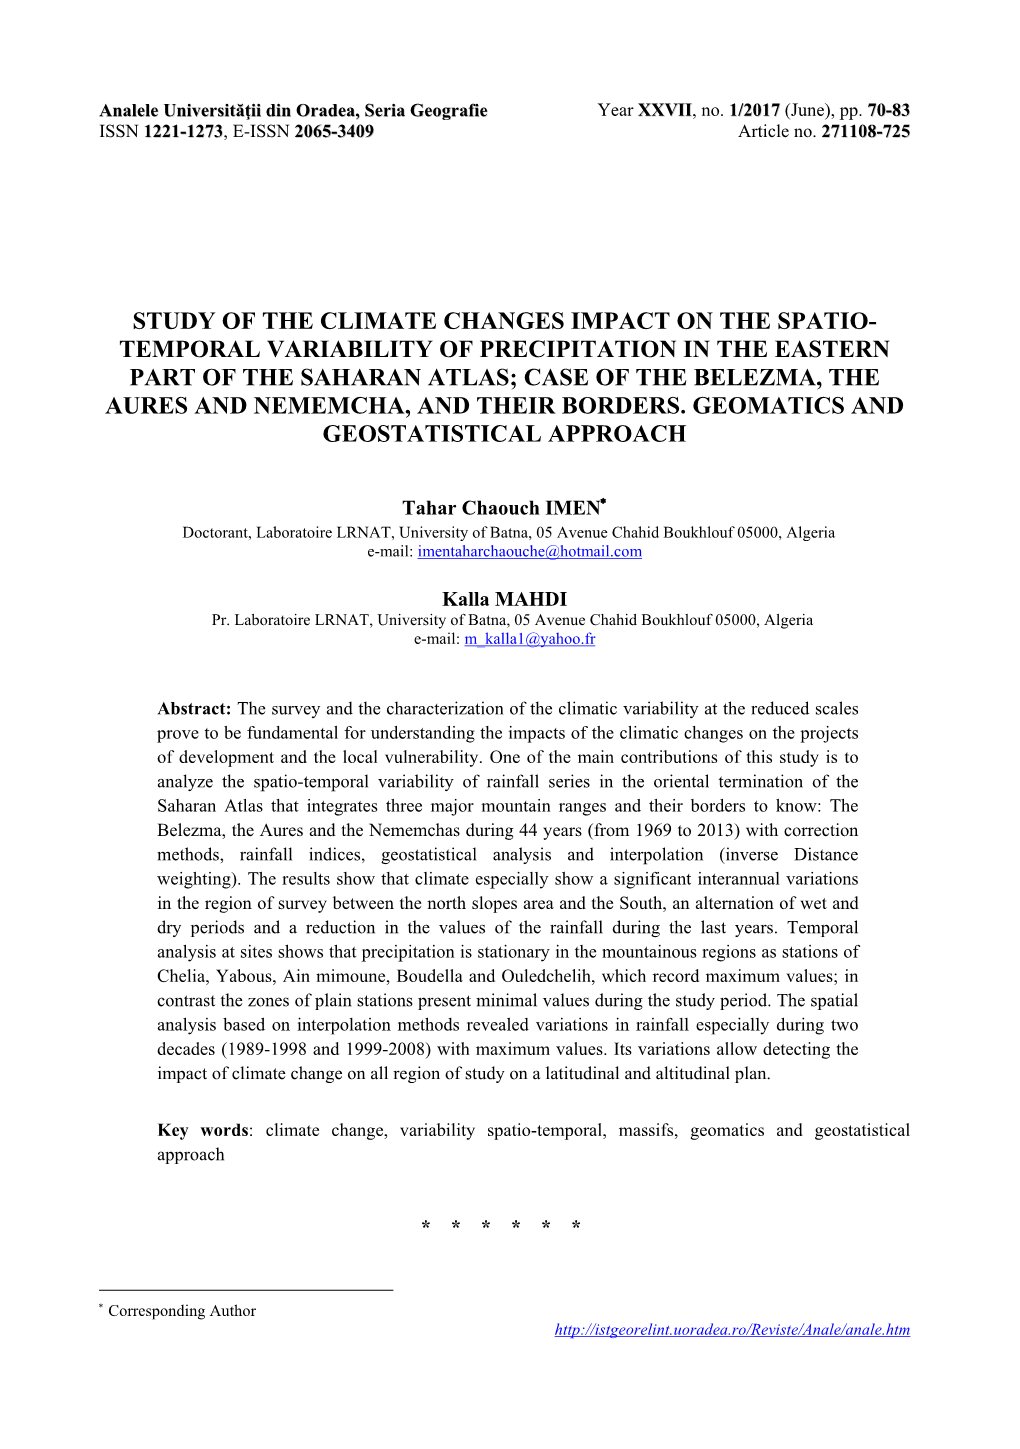 Study of the Climate Changes Impact on the Spatio- Temporal Variability of Precipitation in the Eastern Part of the Saharan Atla